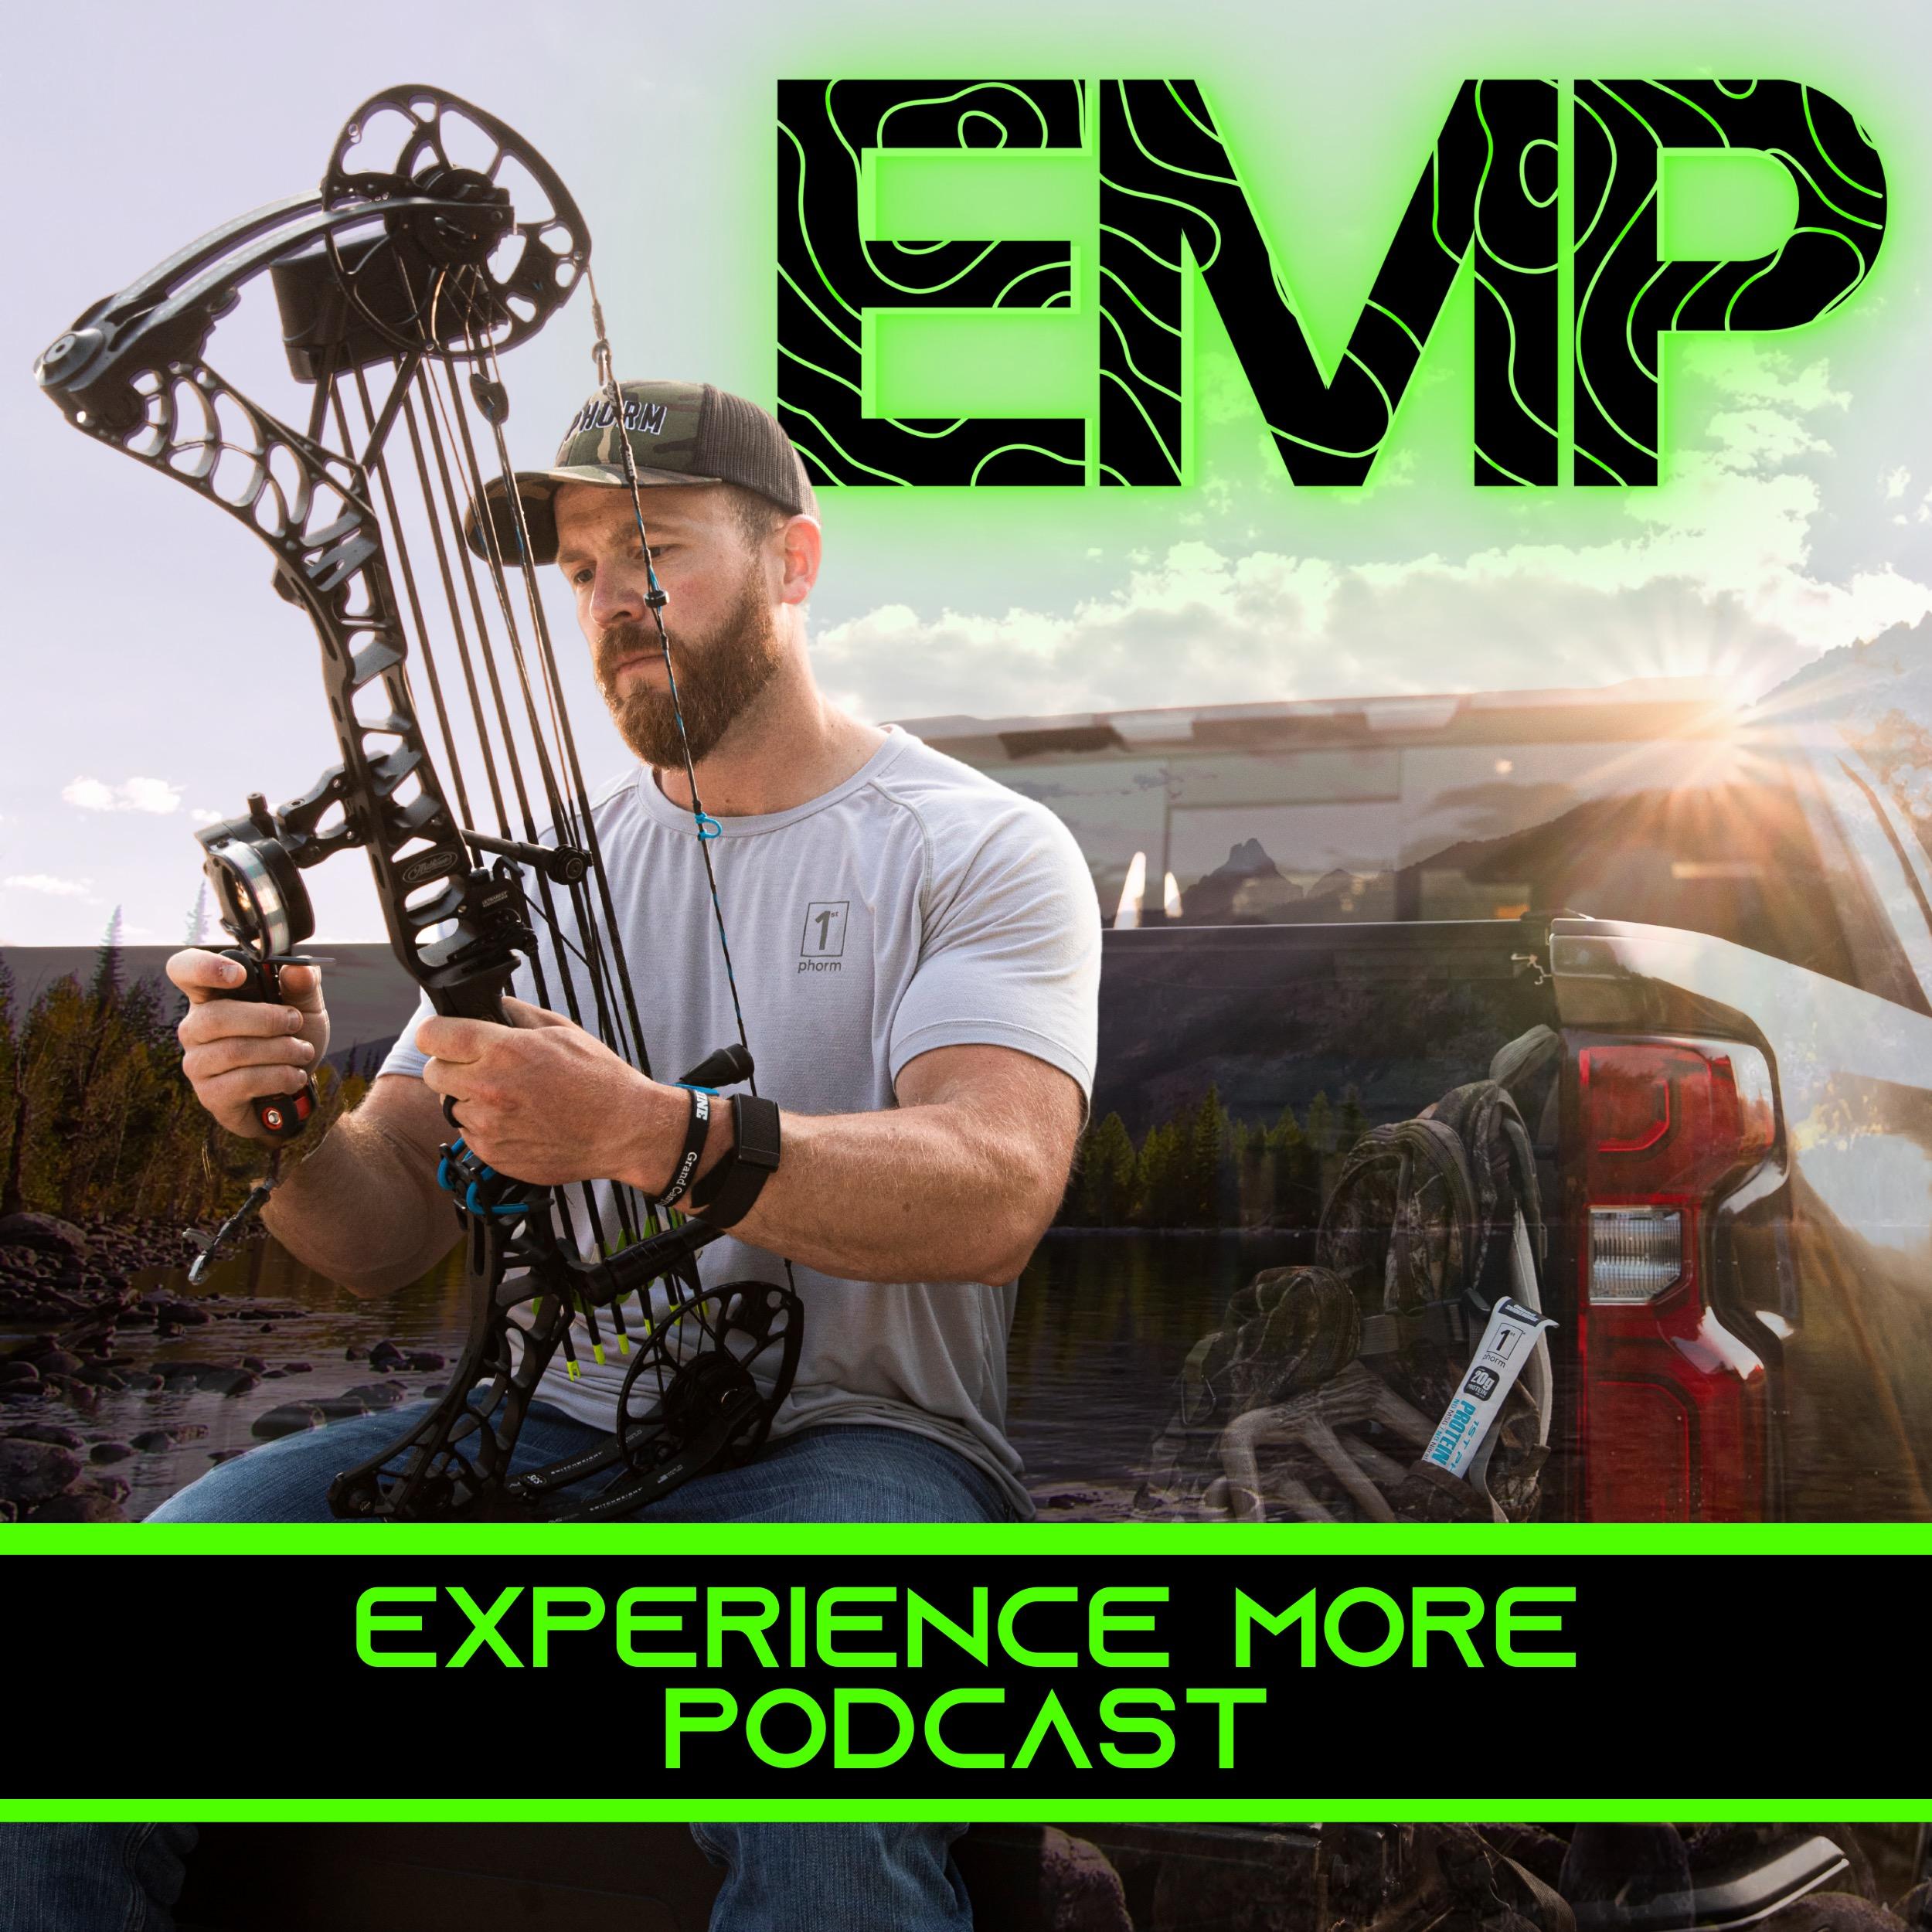 The Experience More podcast